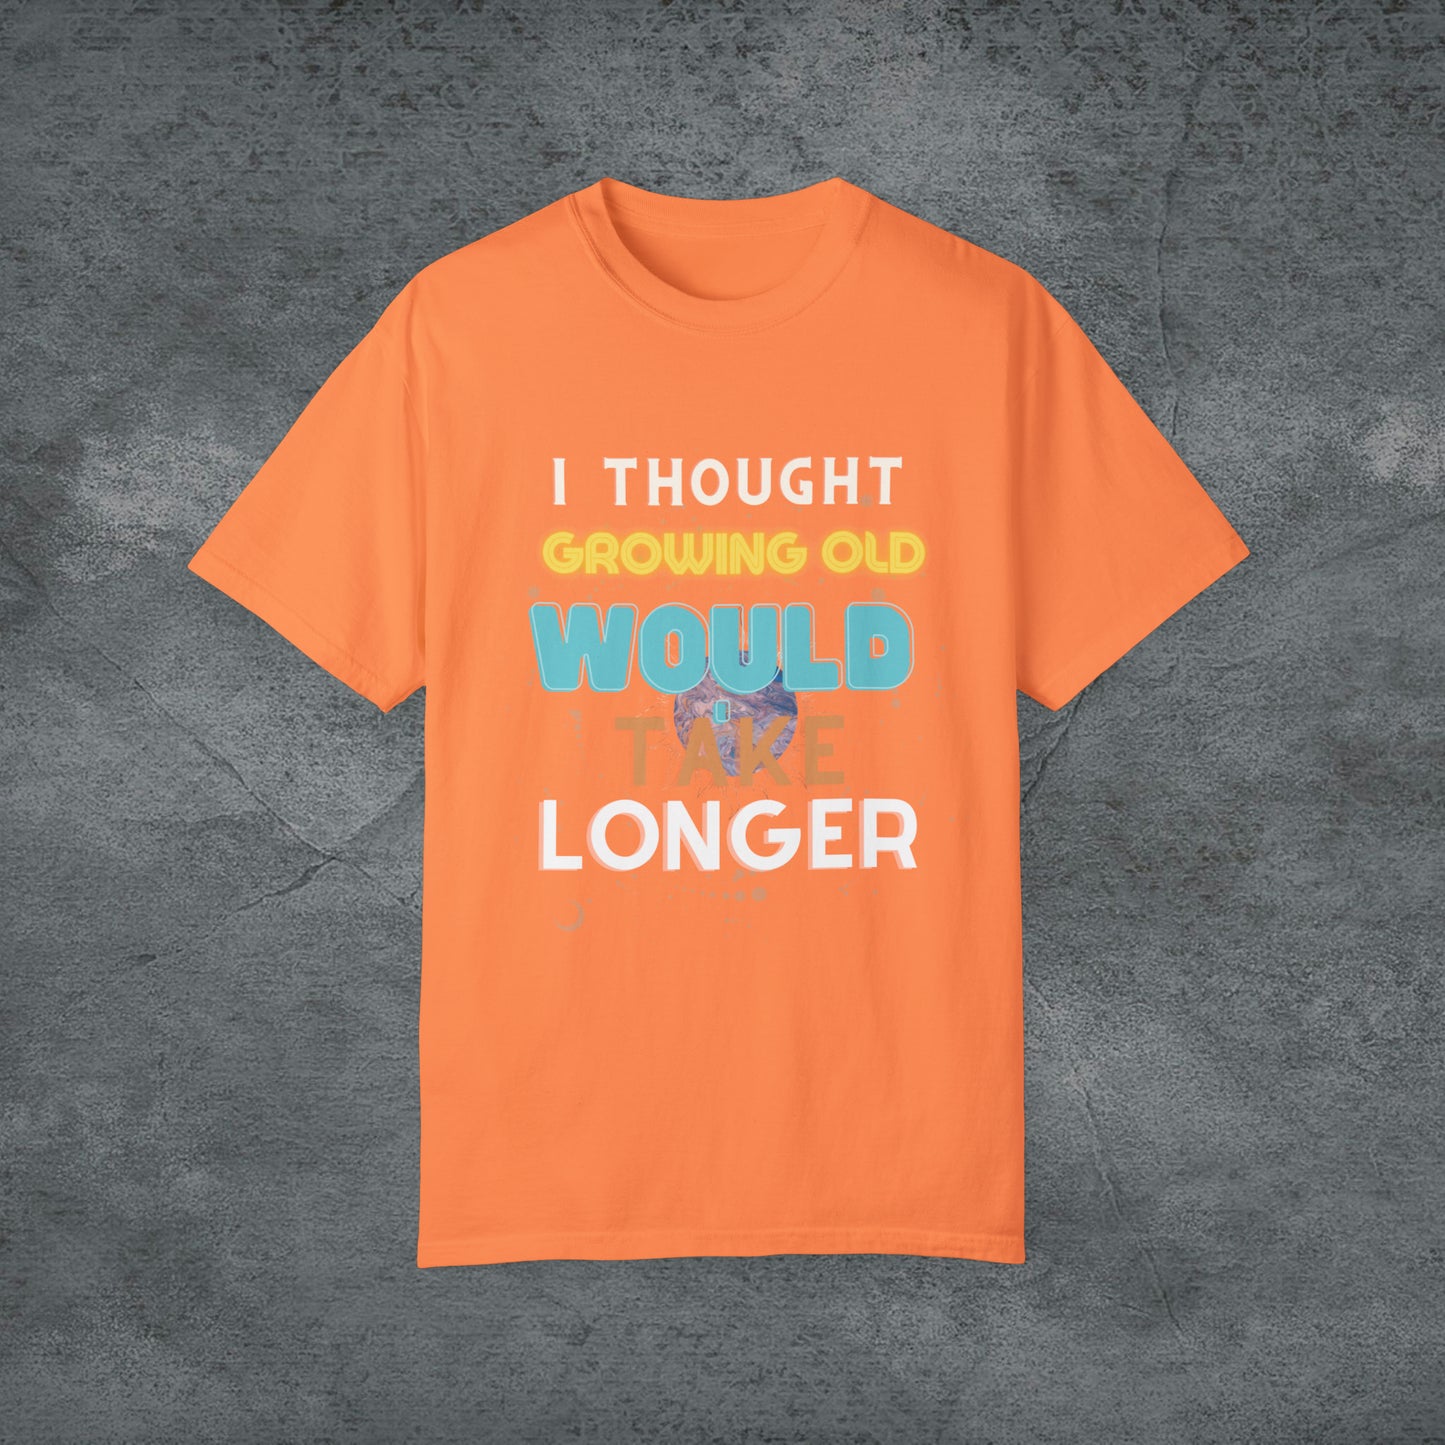 I Thought Growing Old Would Take Longer T-Shirt | Getting Older T Shirt | Funny Adulting T-Shirt | Old Age T Shirt | Old Person T Shirt T-Shirt Melon S 